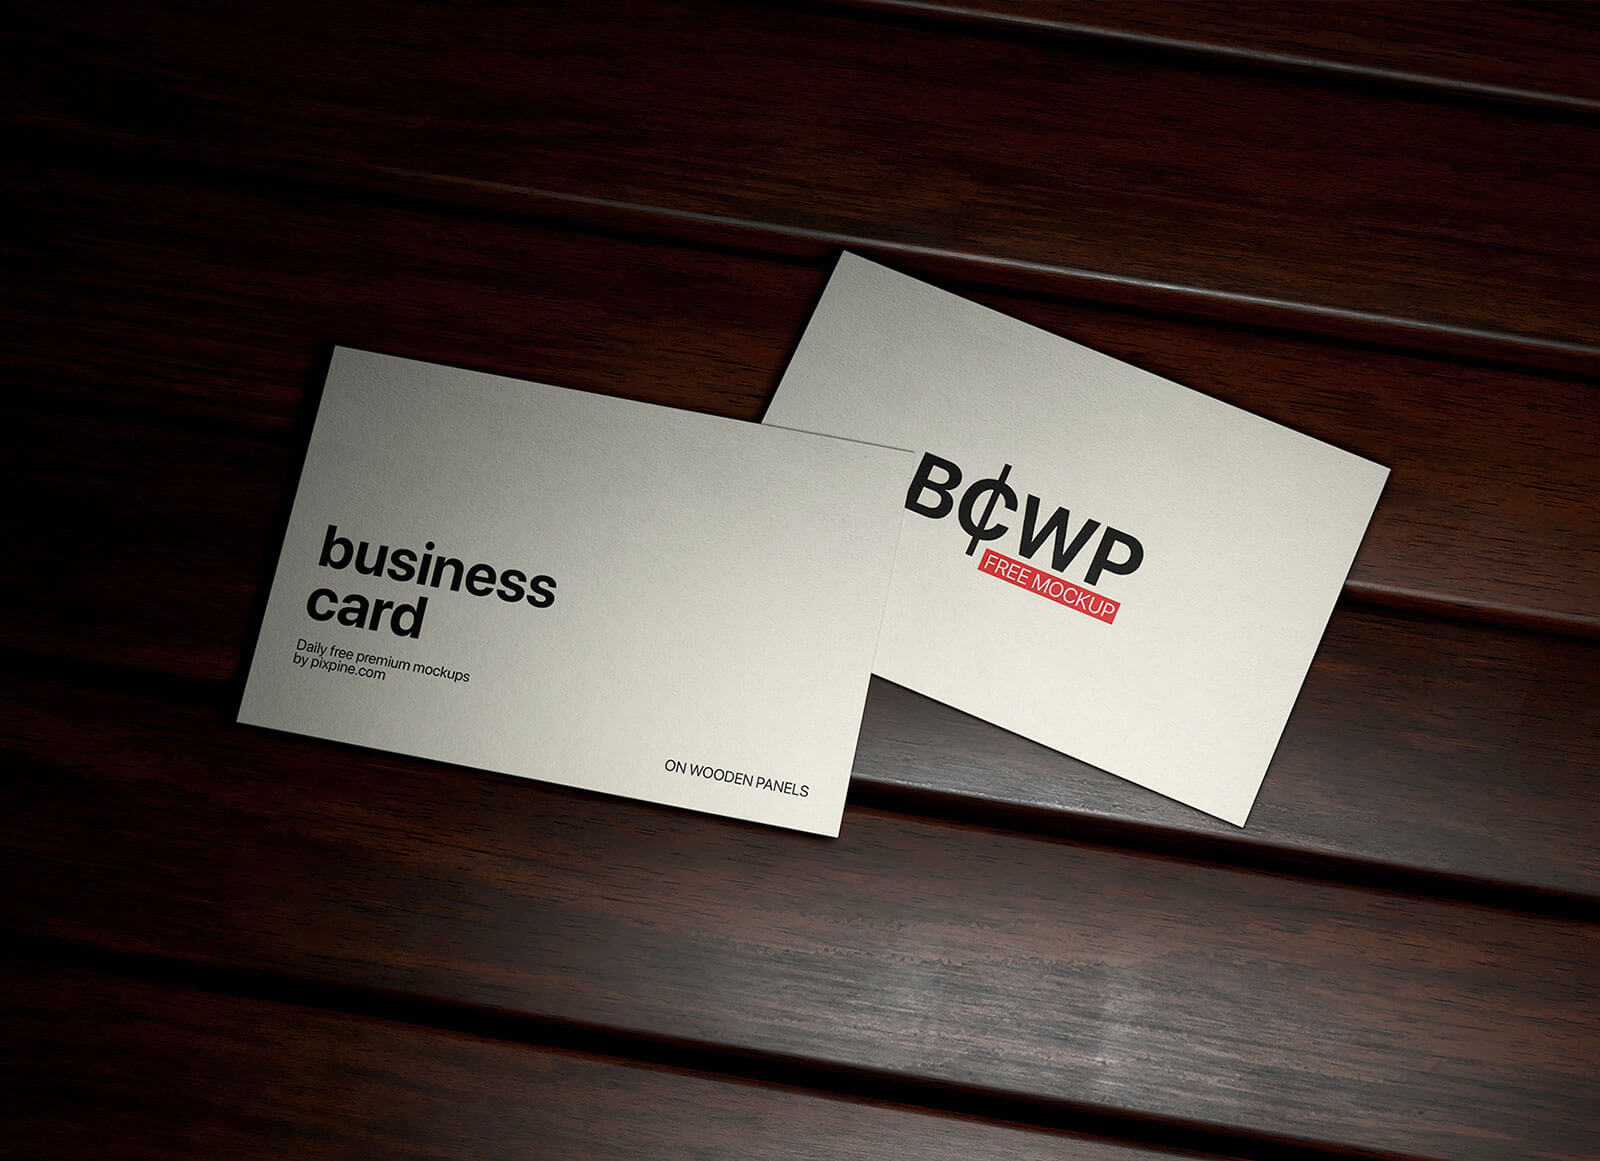 Free-Business-Card-On-Wooden-Panel-Mockup-PSD